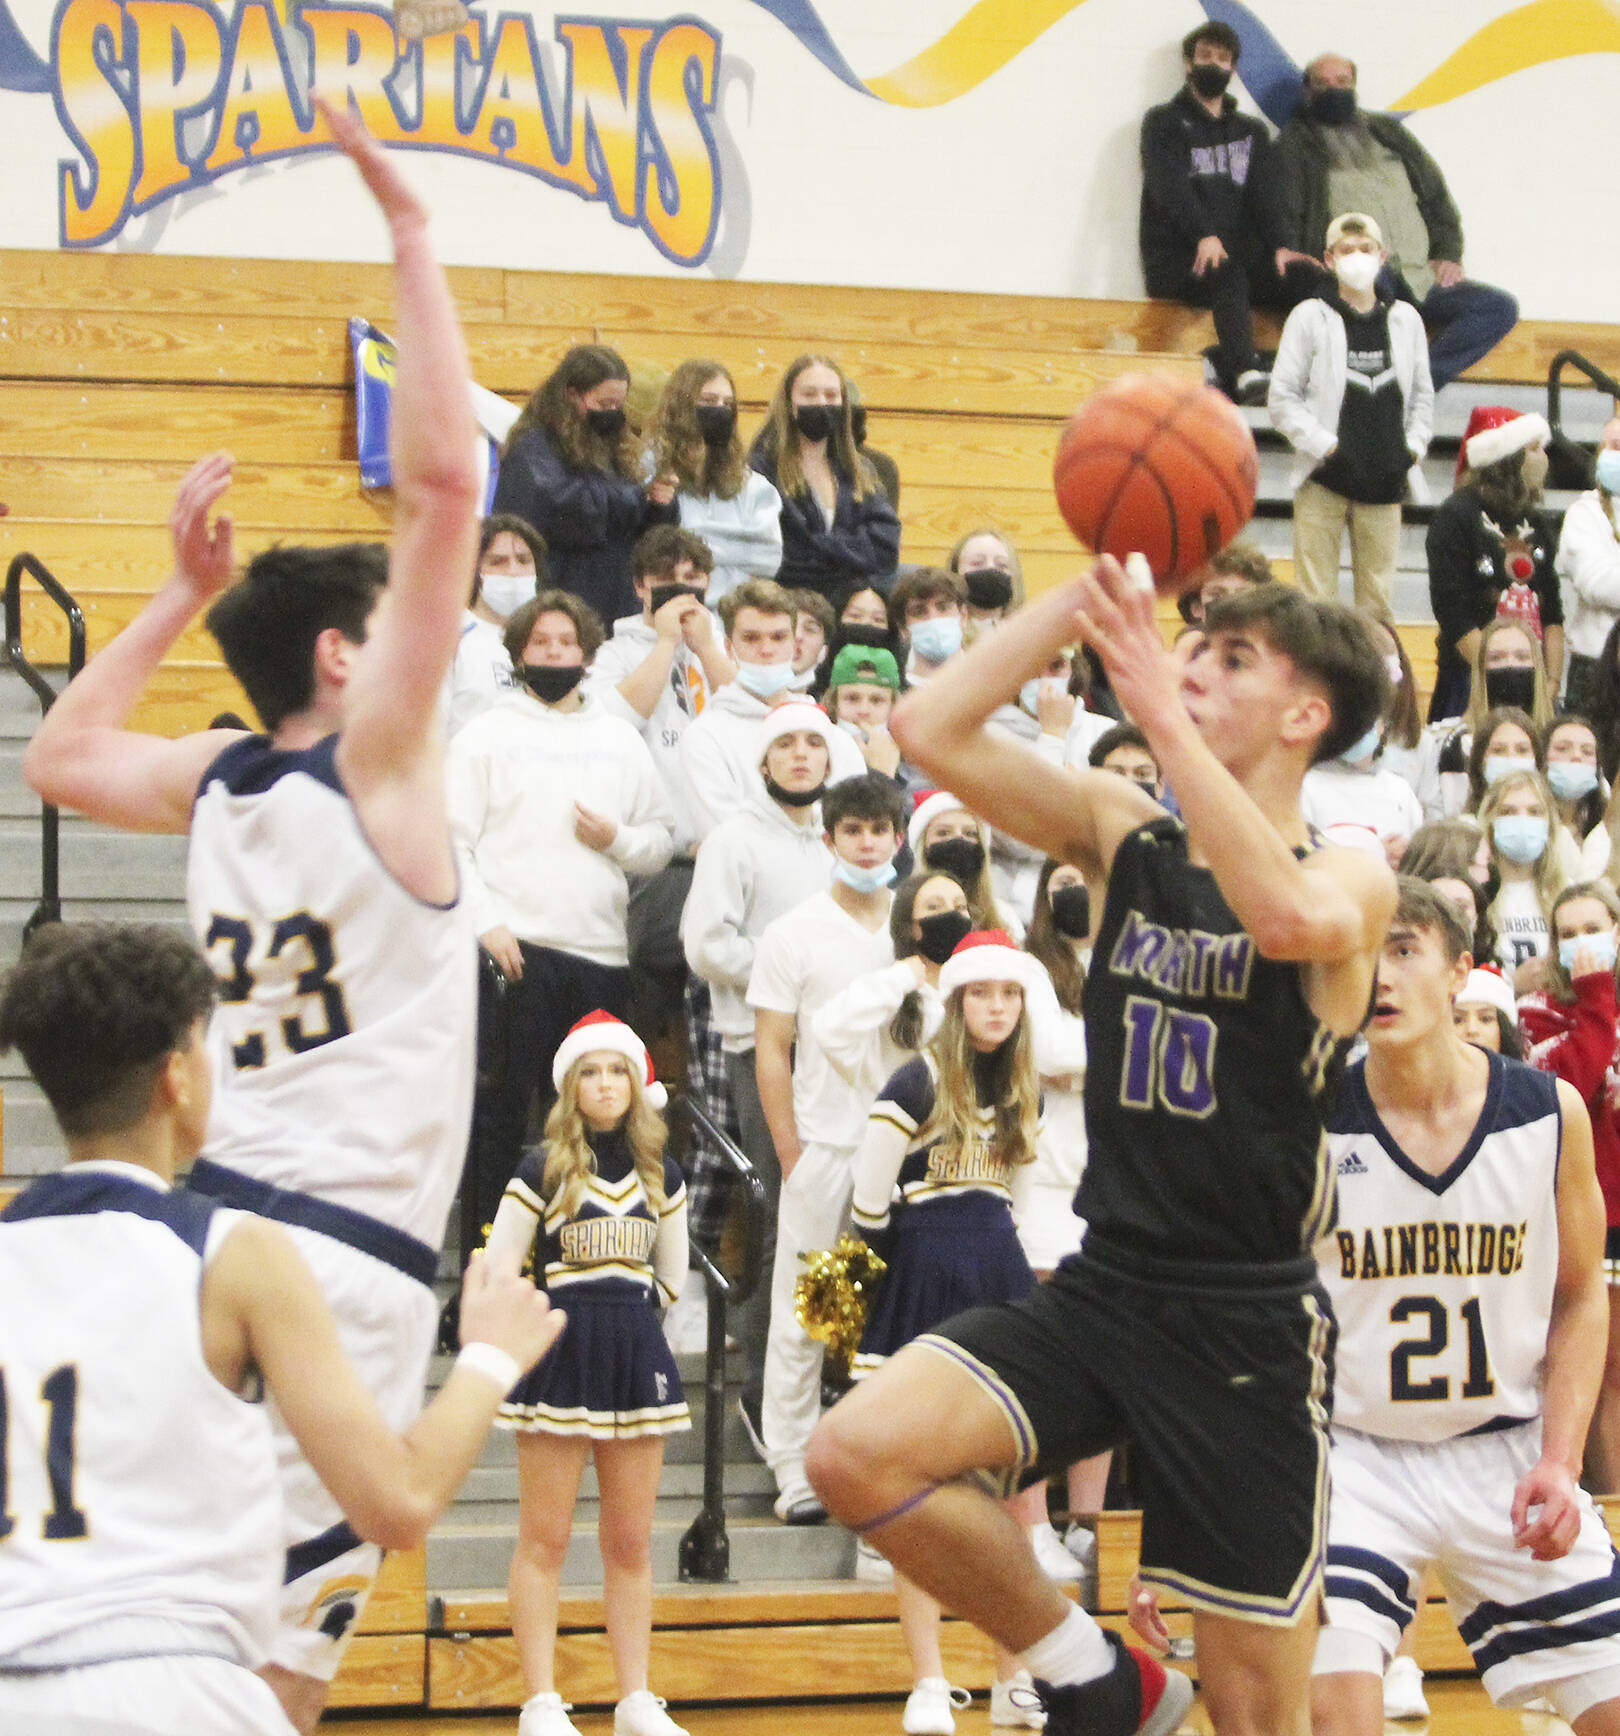 Cade Orness (10) drives to the hoop and puts up a short runner against James Carey (23) of Bainbridge. Breno Oguri (11) and Everett Moore (21) also defend. Steve Powell/North Kitsap Herald photos